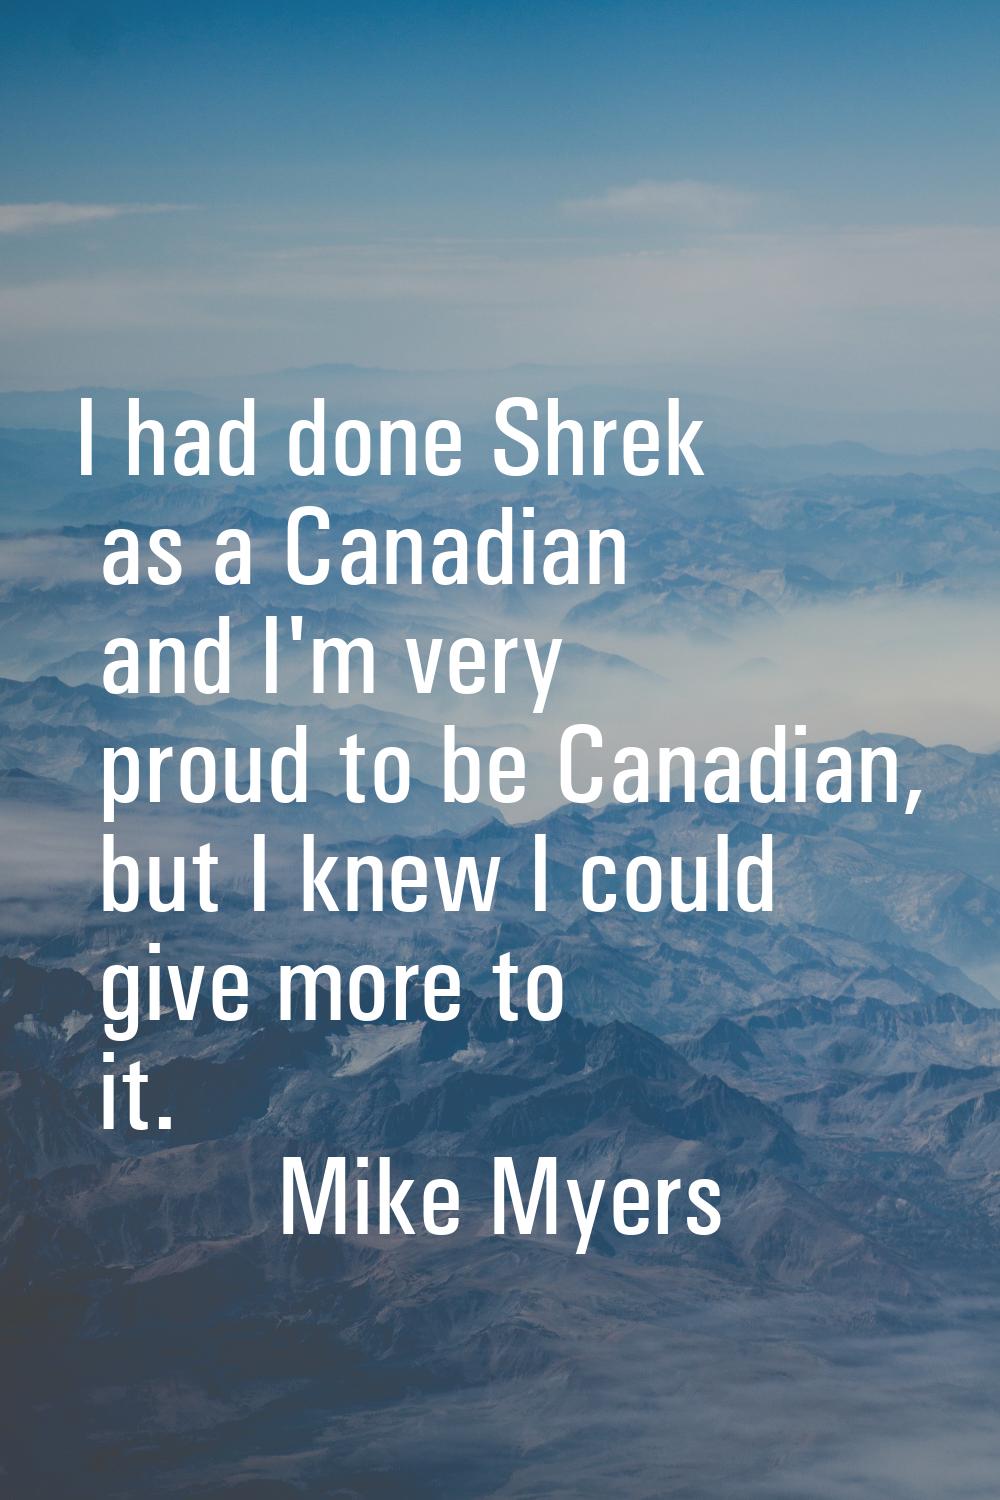 I had done Shrek as a Canadian and I'm very proud to be Canadian, but I knew I could give more to i